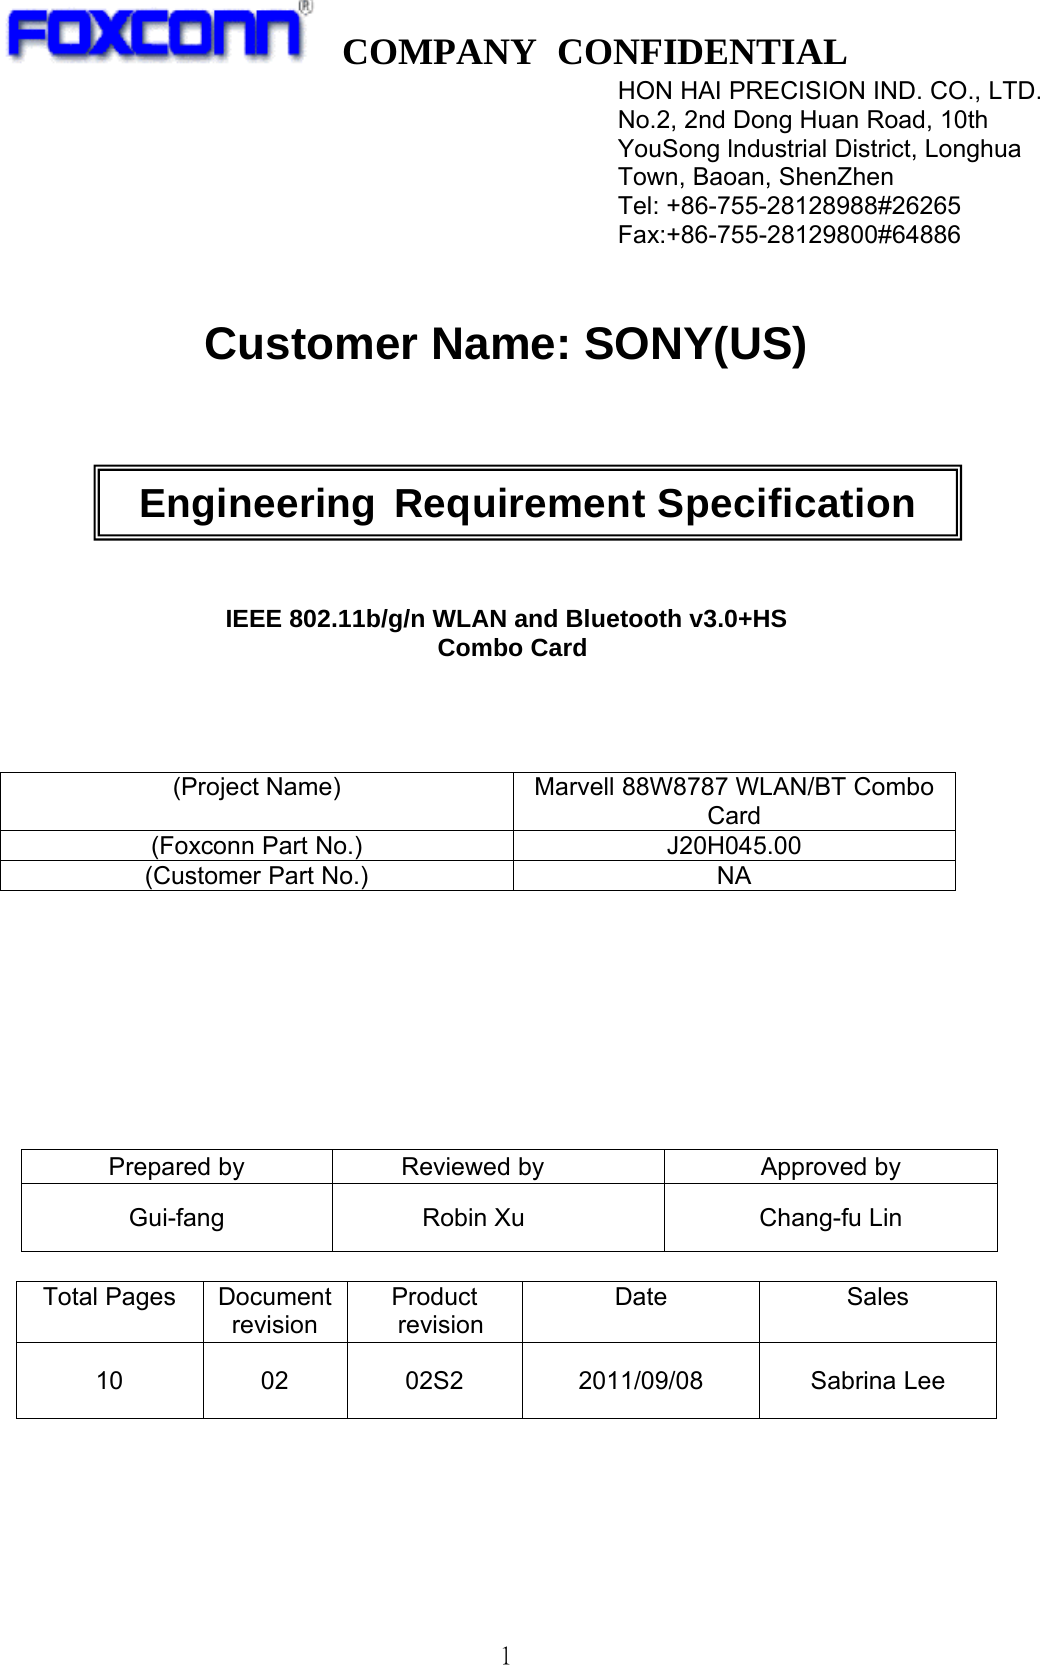  COMPANY CONFIDENTIAL   1        Customer Name: SONY(US)          IEEE 802.11b/g/n WLAN and Bluetooth v3.0+HS  Combo Card    (Project Name)  Marvell 88W8787 WLAN/BT Combo   Card (Foxconn Part No.)  J20H045.00 (Customer Part No.)  NA         Prepared by  Reviewed by  Approved by Gui-fang Robin Xu  Chang-fu Lin  Total Pages  Document revision Product  revision Date Sales 10 02 02S2 2011/09/08 Sabrina Lee HON HAI PRECISION IND. CO., LTD. No.2, 2nd Dong Huan Road, 10th YouSong lndustrial District, Longhua Town, Baoan, ShenZhen Tel: +86-755-28128988#26265 Fax:+86-755-28129800#64886Engineering Requirement Specification 